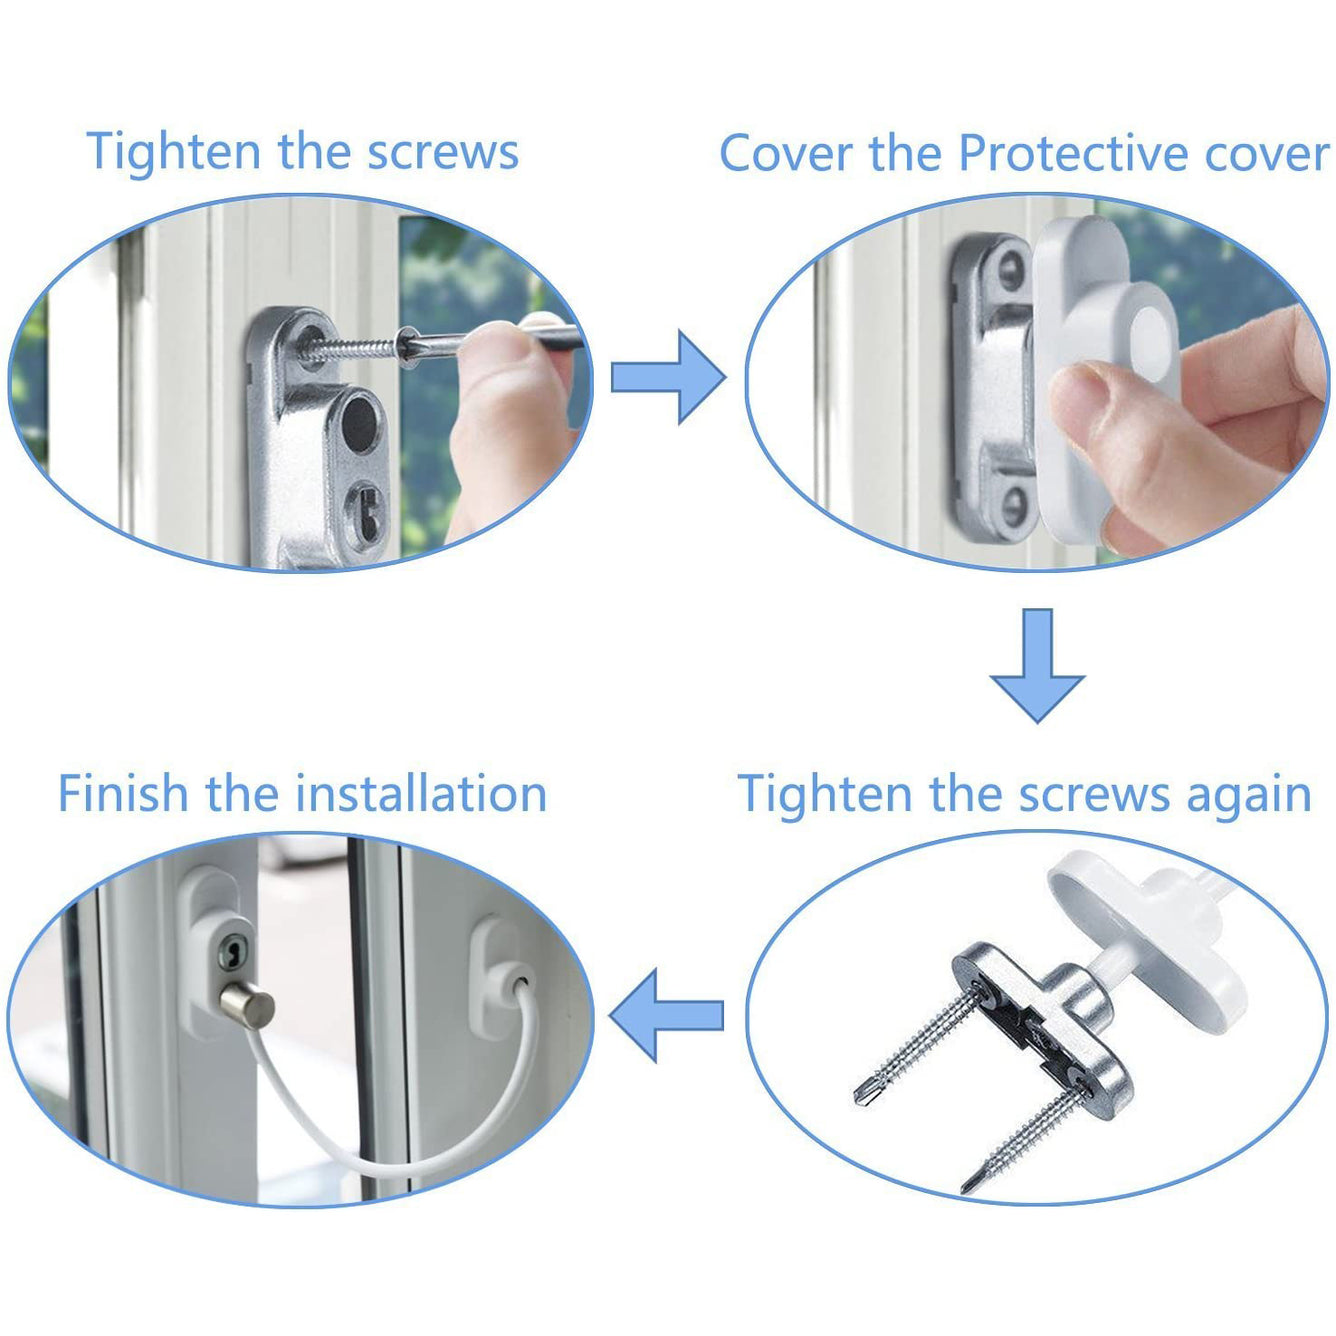 Proster Window Restrictor Locks 4 Packs Security Cable